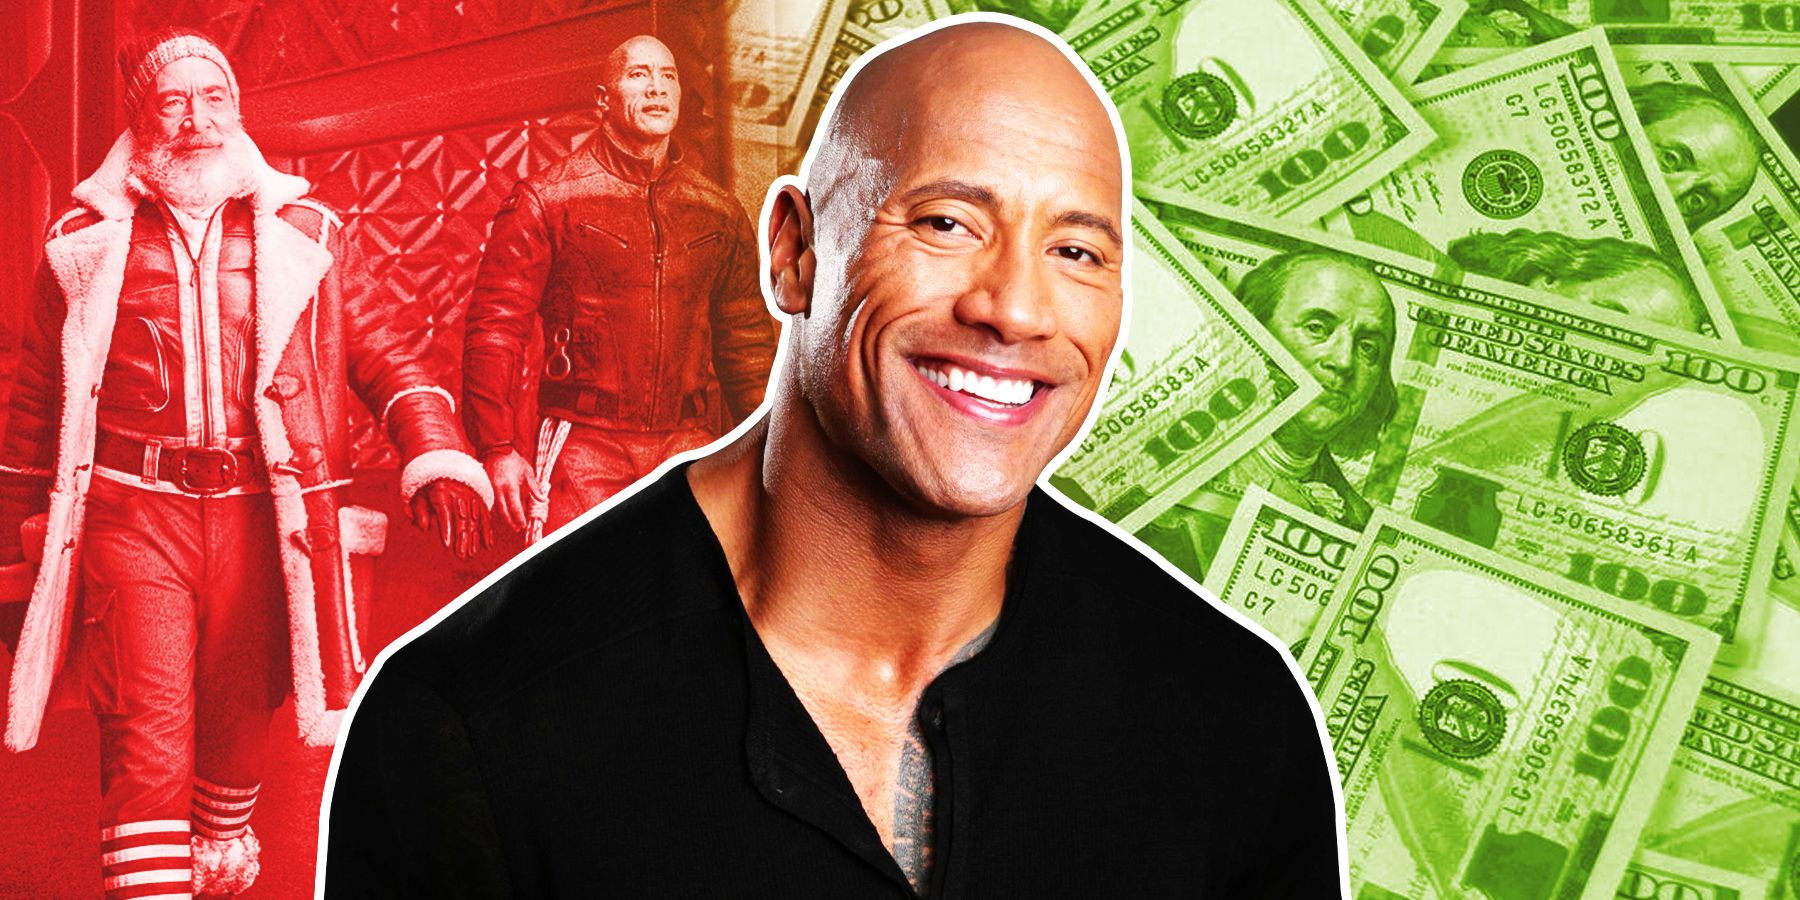 The Rock Gets Paid $1 Million to Post About His Upcoming Movie on Social  Media